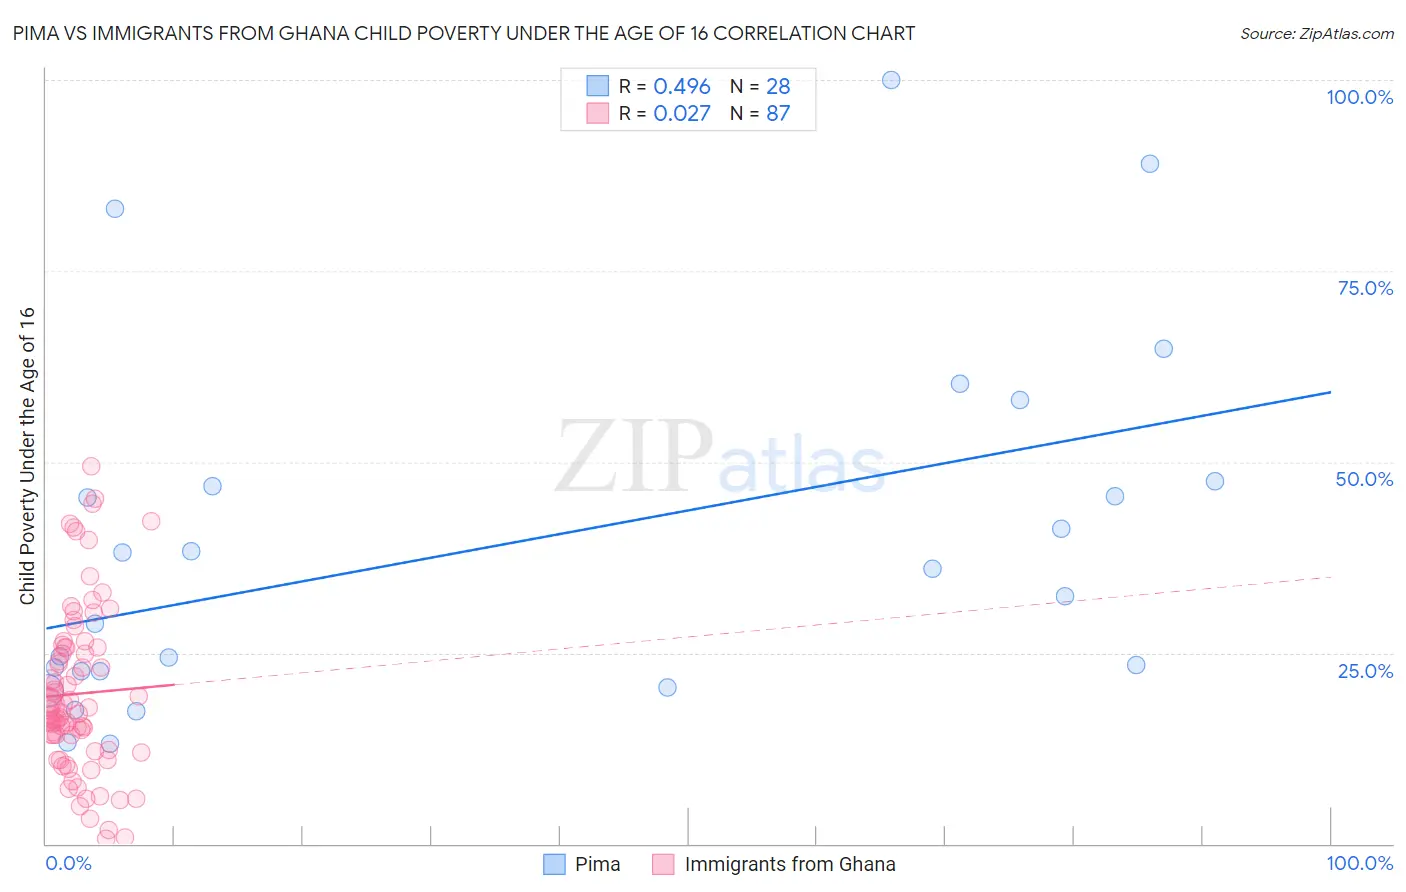 Pima vs Immigrants from Ghana Child Poverty Under the Age of 16